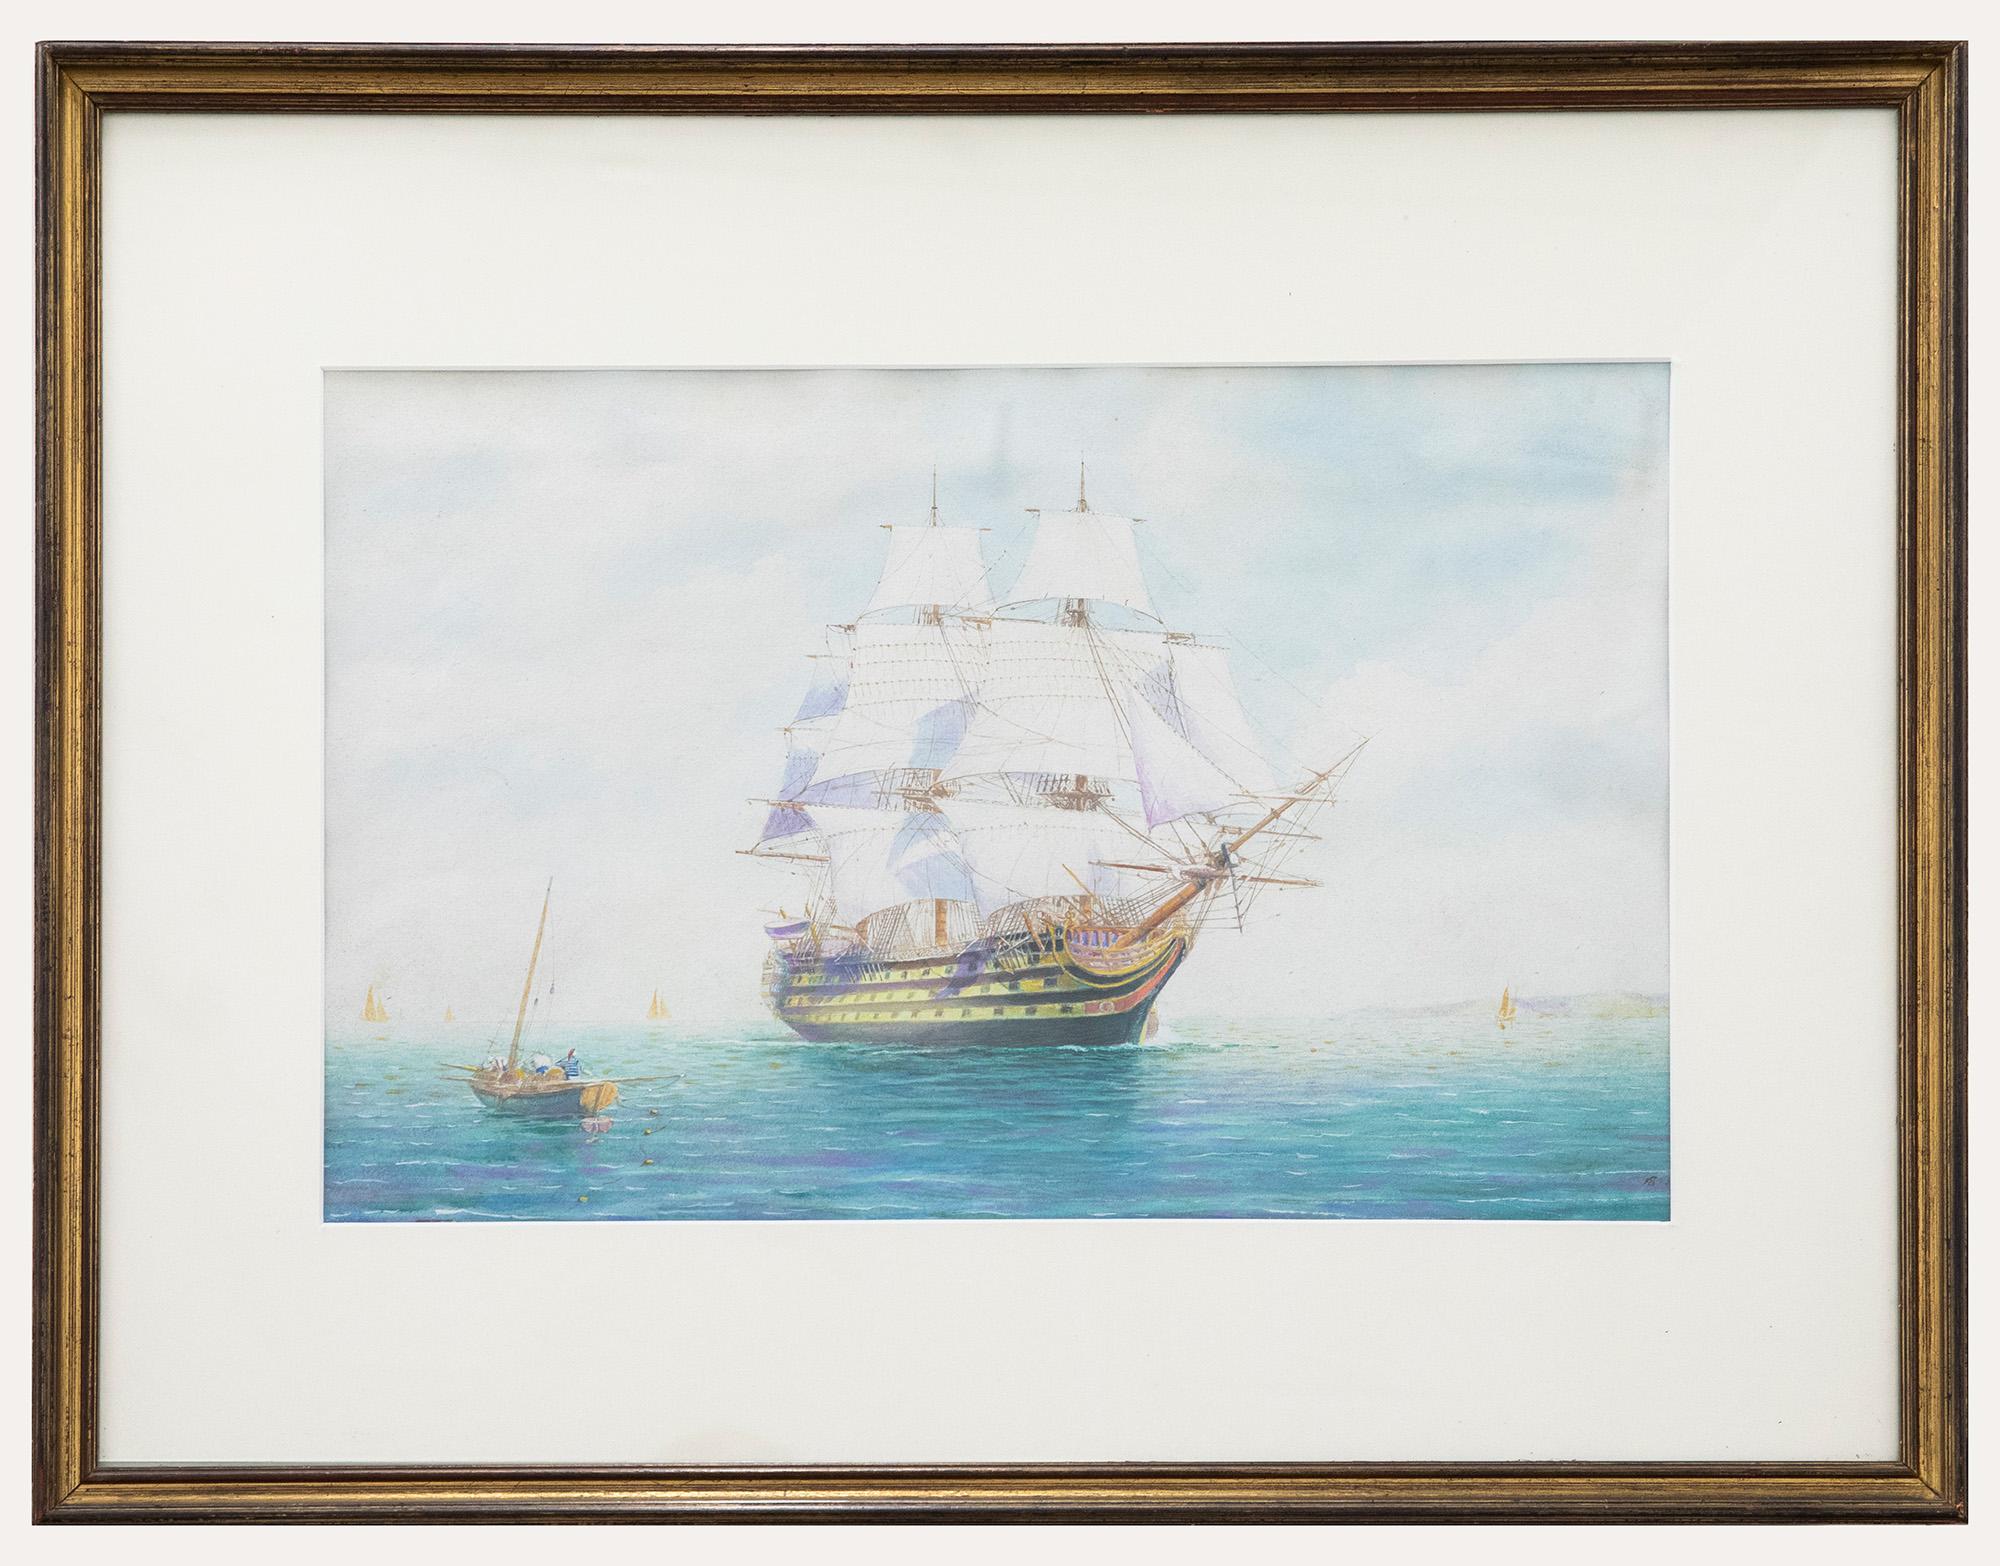 Unknown Figurative Art - J. Grier - Framed Mid 19th Century Watercolour, Naval Ship at Sea